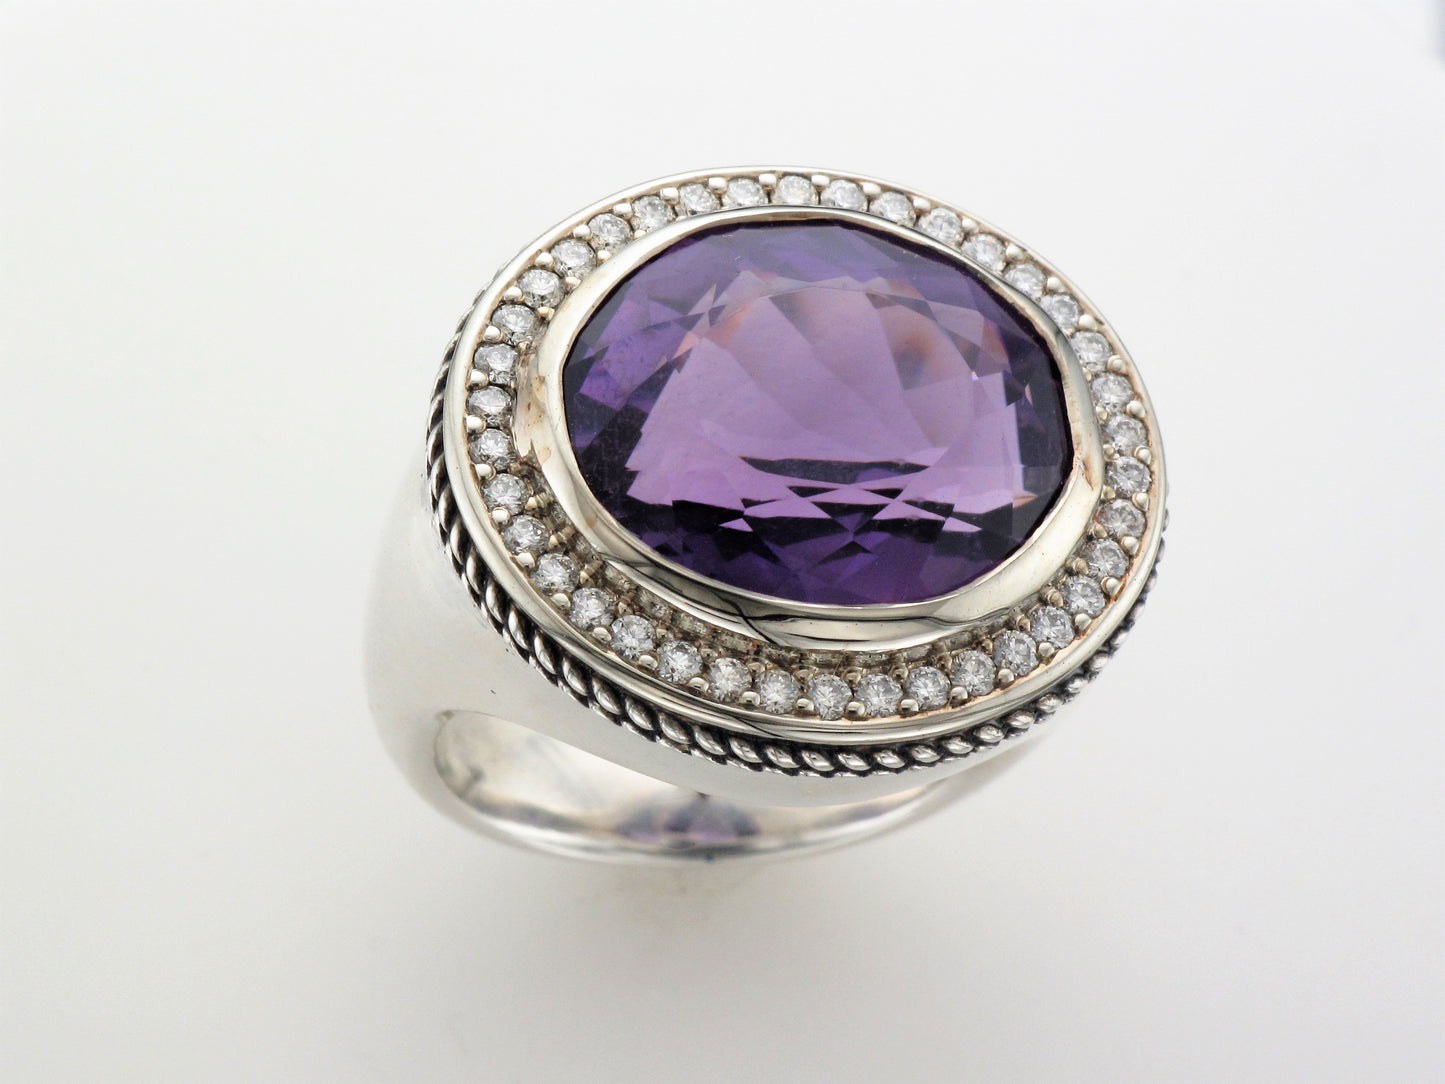 Silver Amethyst Ring with Diamond Accents